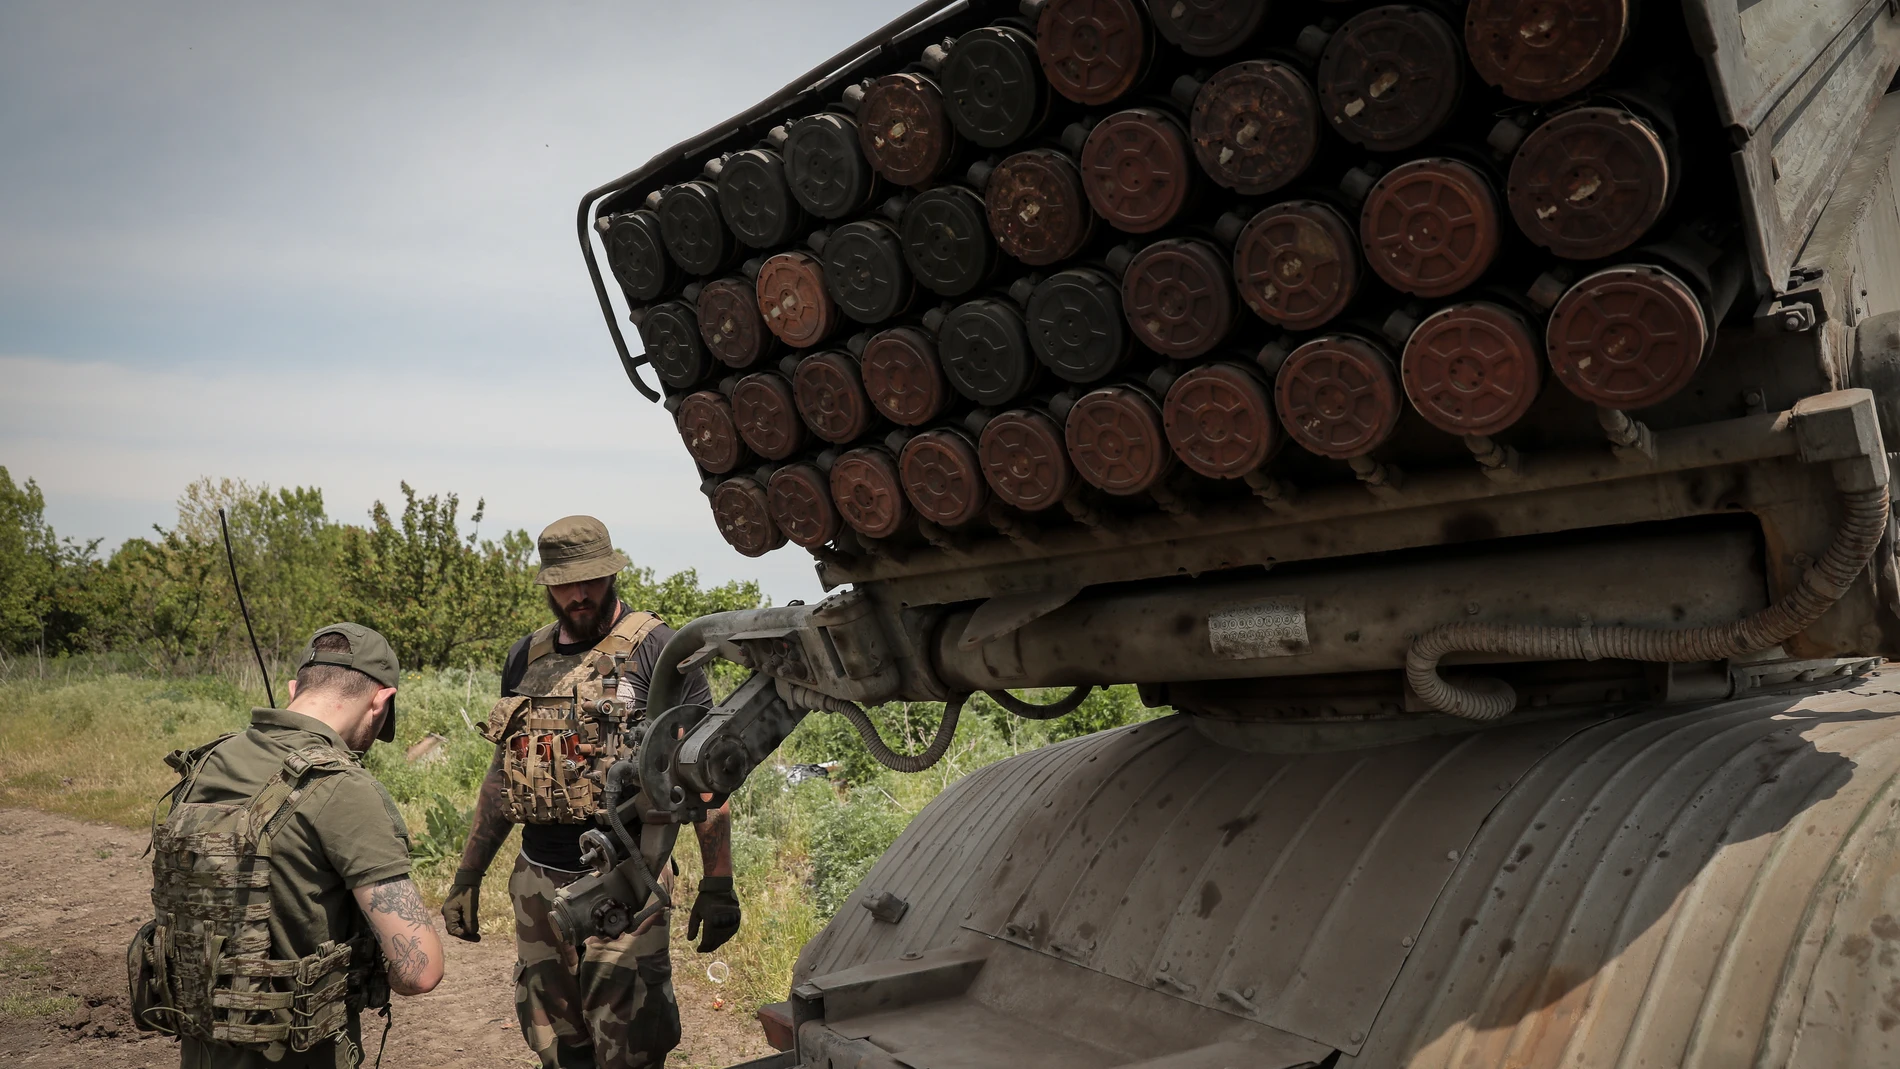 Undisclosed (Ukraine), 19/05/2023.- Ukrainian servicemen from the 24th Mechanized Brigade 'King Danylo' prepare a BM-21 'Grad' multiple rocket launcher system (MLRS) before firing in the direction of the frontline city of Bakhmut, at an undisclosed location, Donetsk region, eastern Ukraine, 19 May 2023, amid the Russian invasion. The frontline city of Bakhmut, a key target for Russian forces, has seen heavy fighting for months. Russian troops on 24 February 2022, entered Ukrainian territory, starting a conflict that has provoked destruction and a humanitarian crisis. (Rusia, Ucrania) EFE/EPA/OLEG PETRASYUK